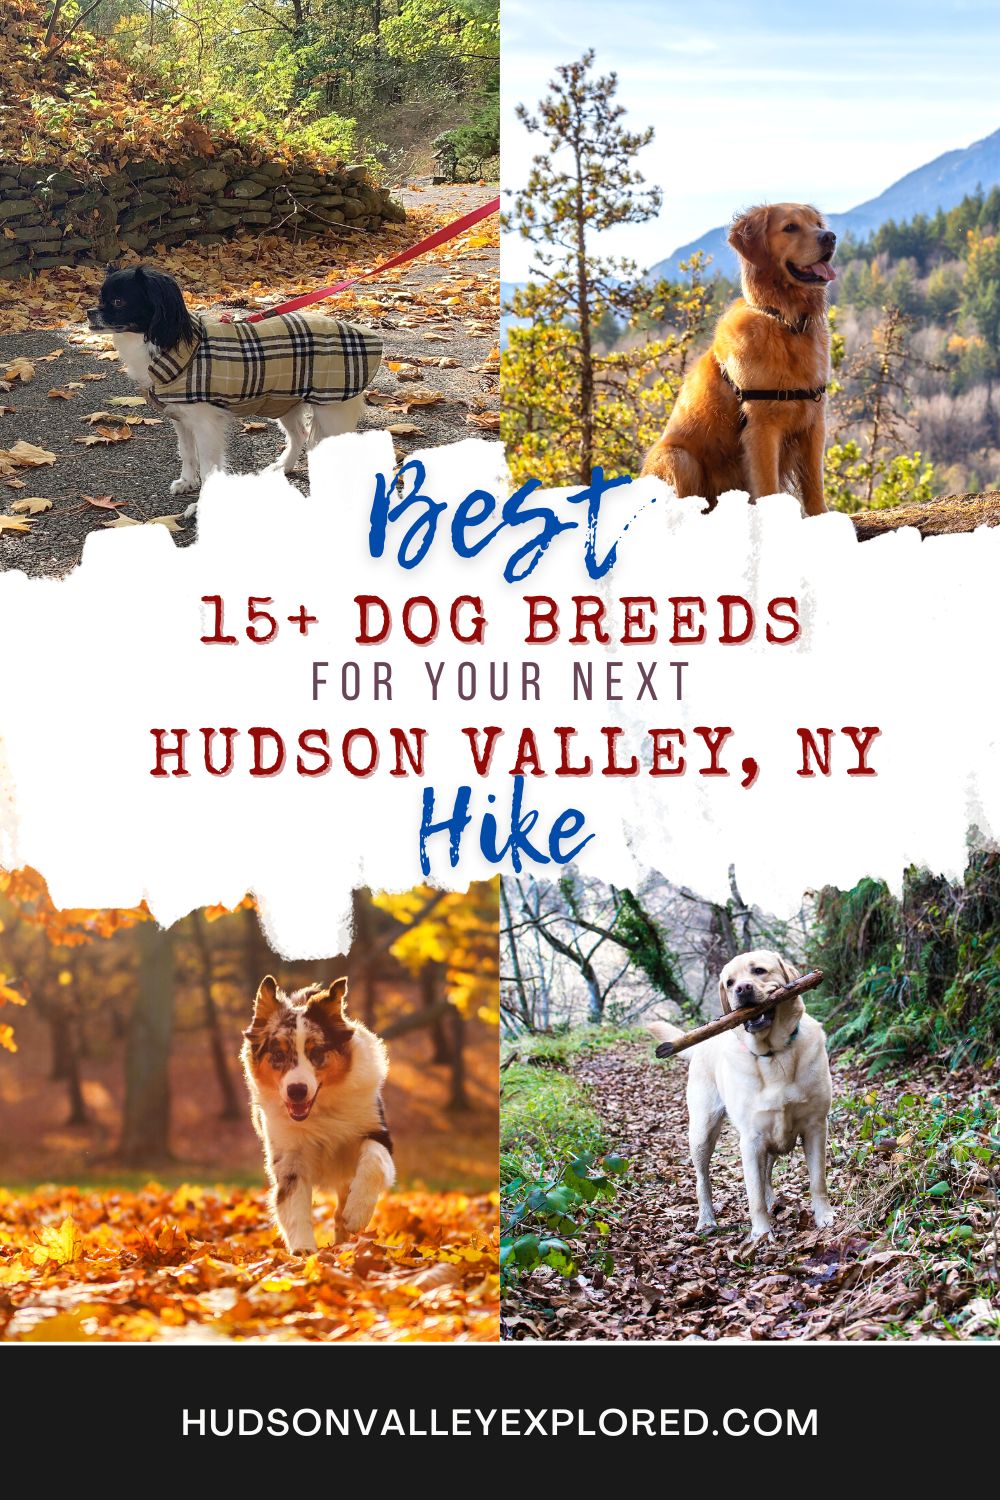 If you're looking for a furry companion who can keep up with your adventurous spirit, this article is perfect for you. Discover the best small dog breeds that are great for hiking, and find your perfect hiking buddy today!